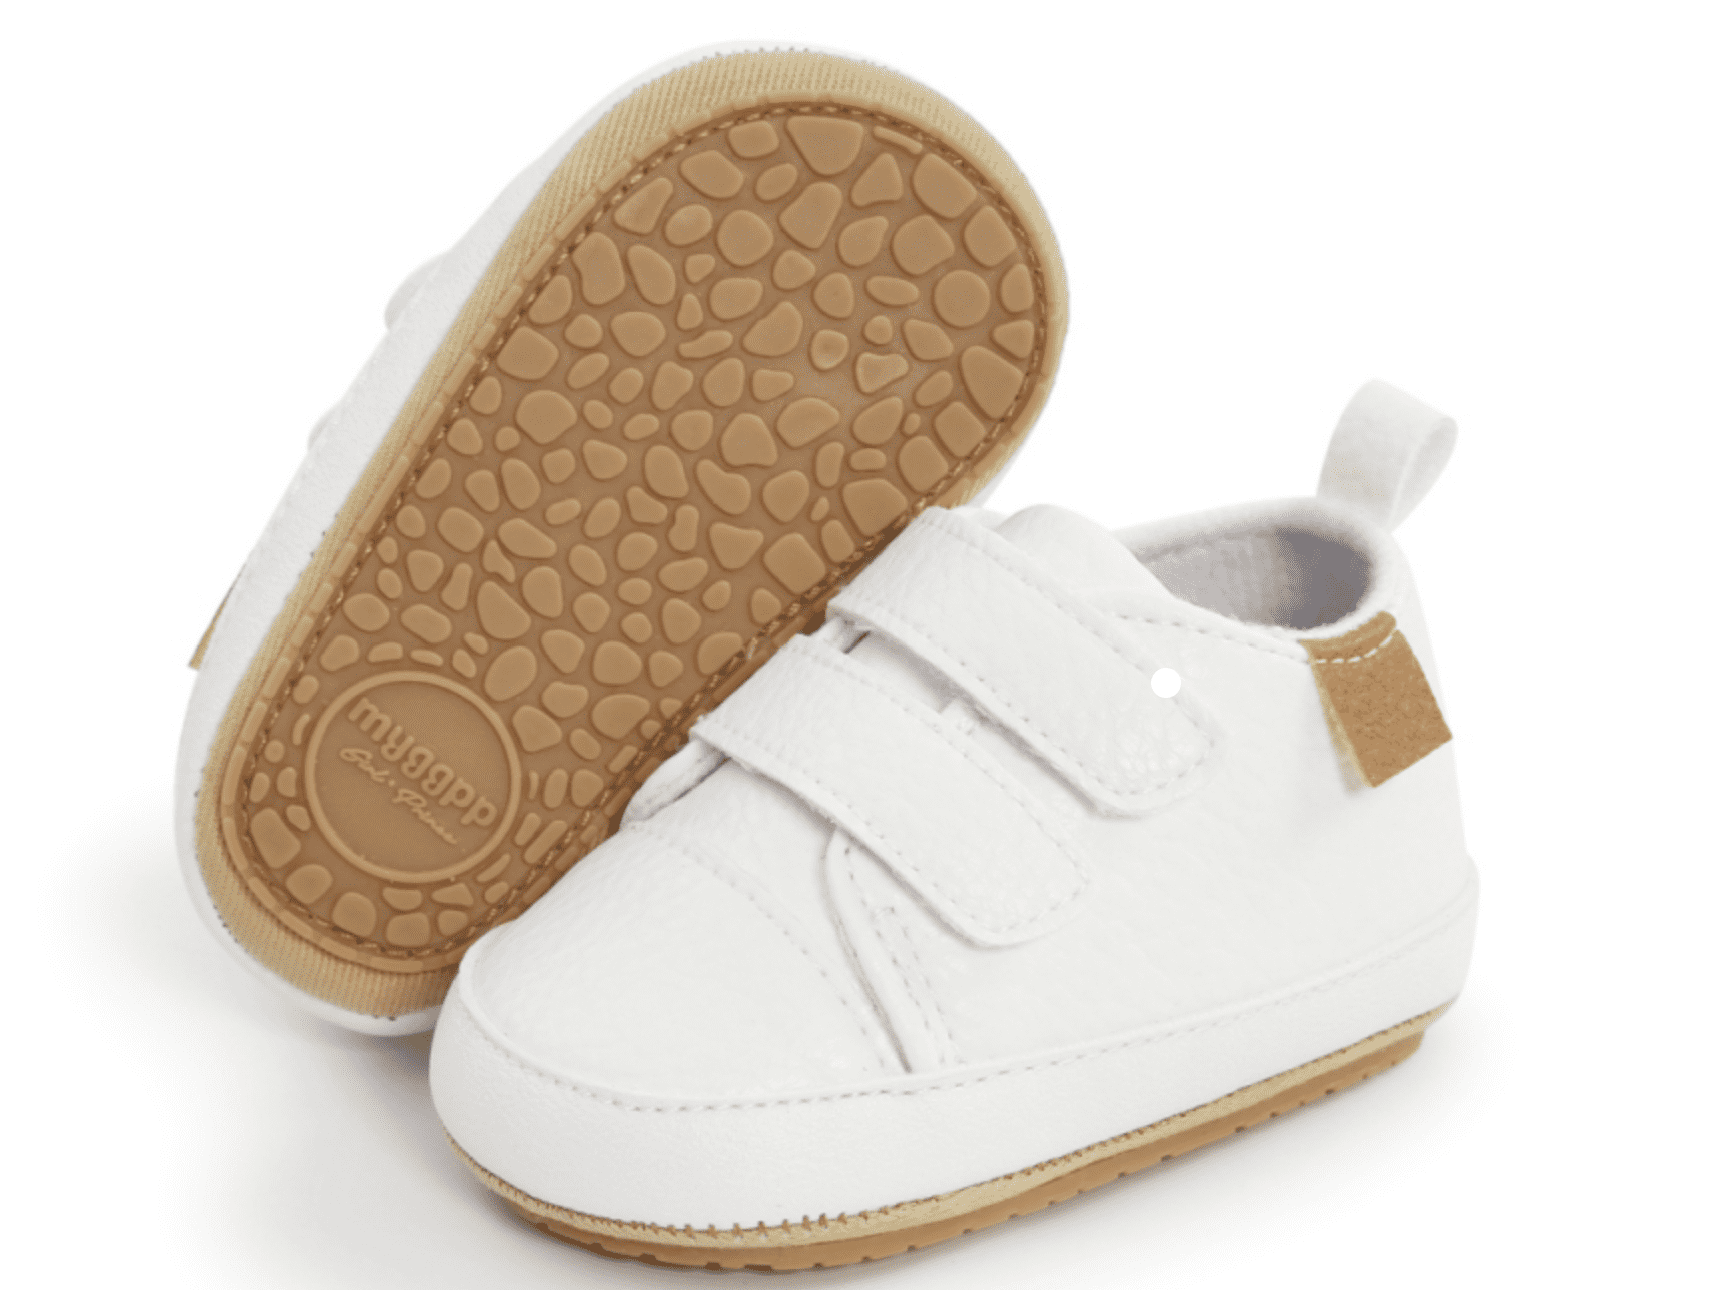 Moby - White Baby Shoes - First Walker Vegan Leather with Velcro Straps.